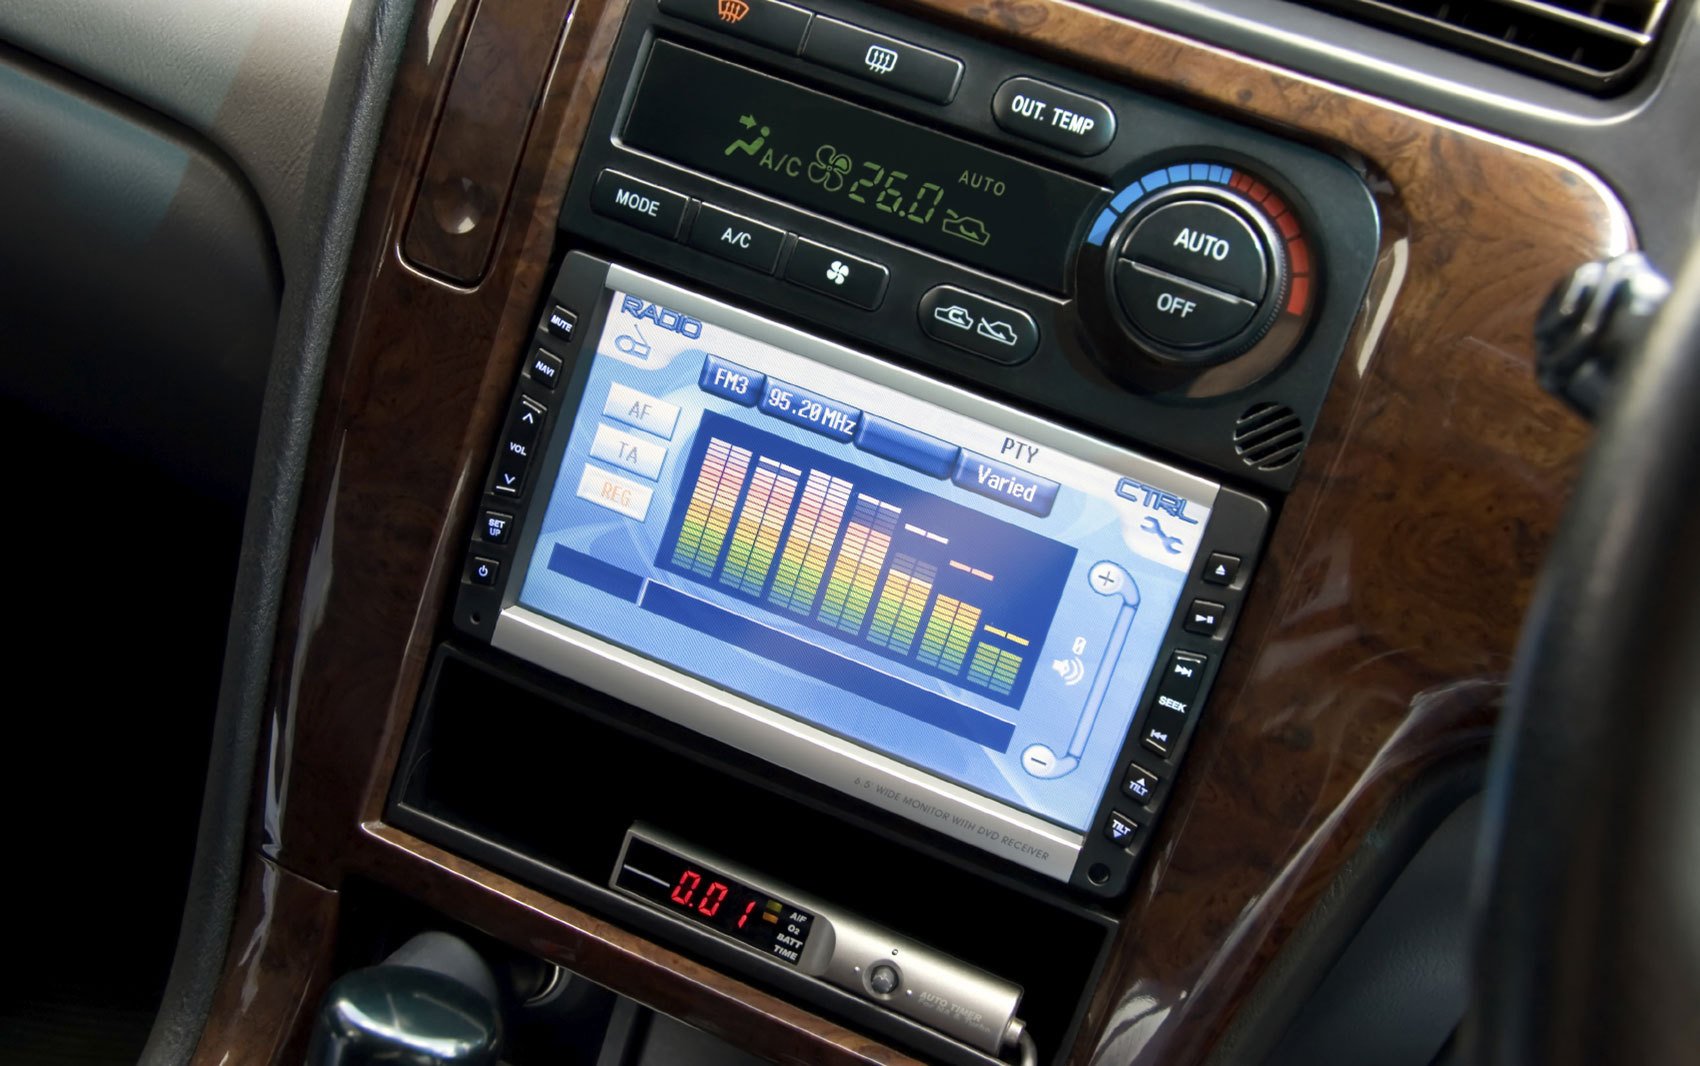 Picture Of A Navigation System